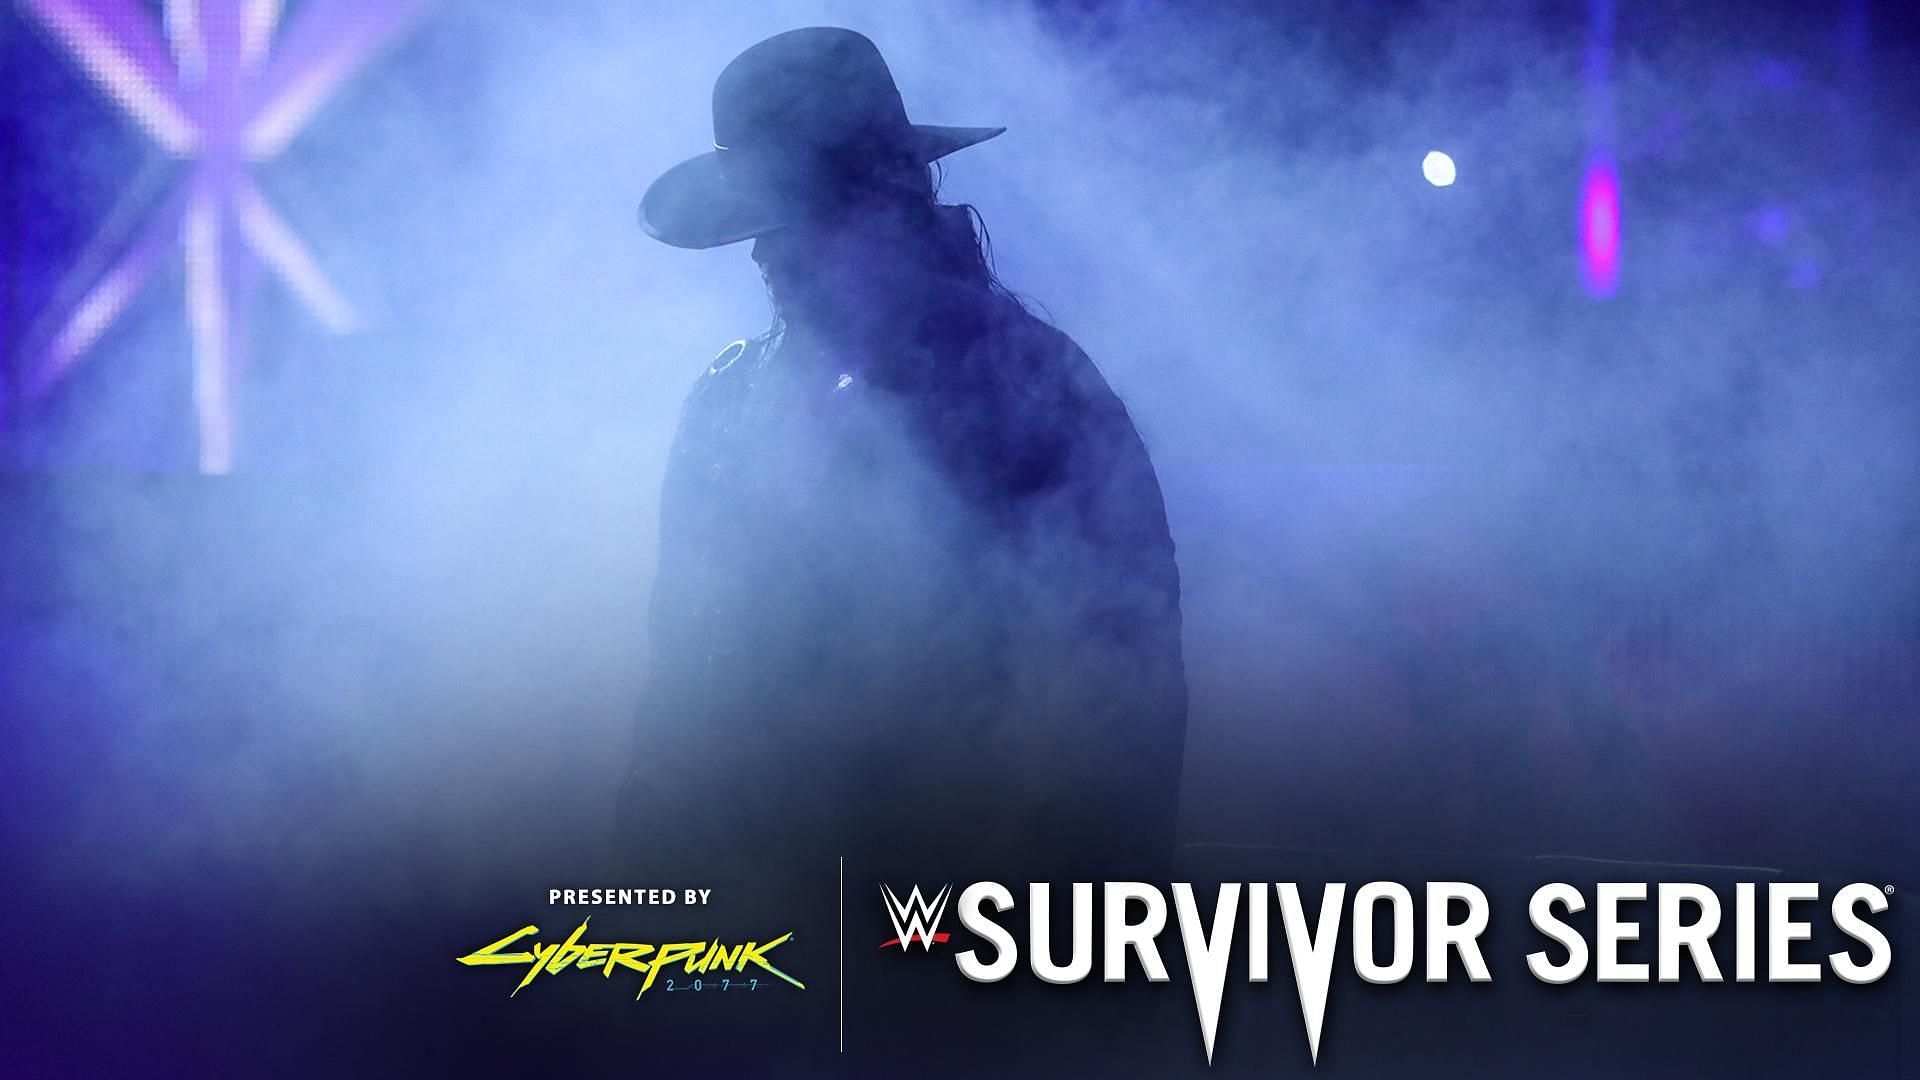 The Undertaker during his retirement ceremony at Survivor Series 2020